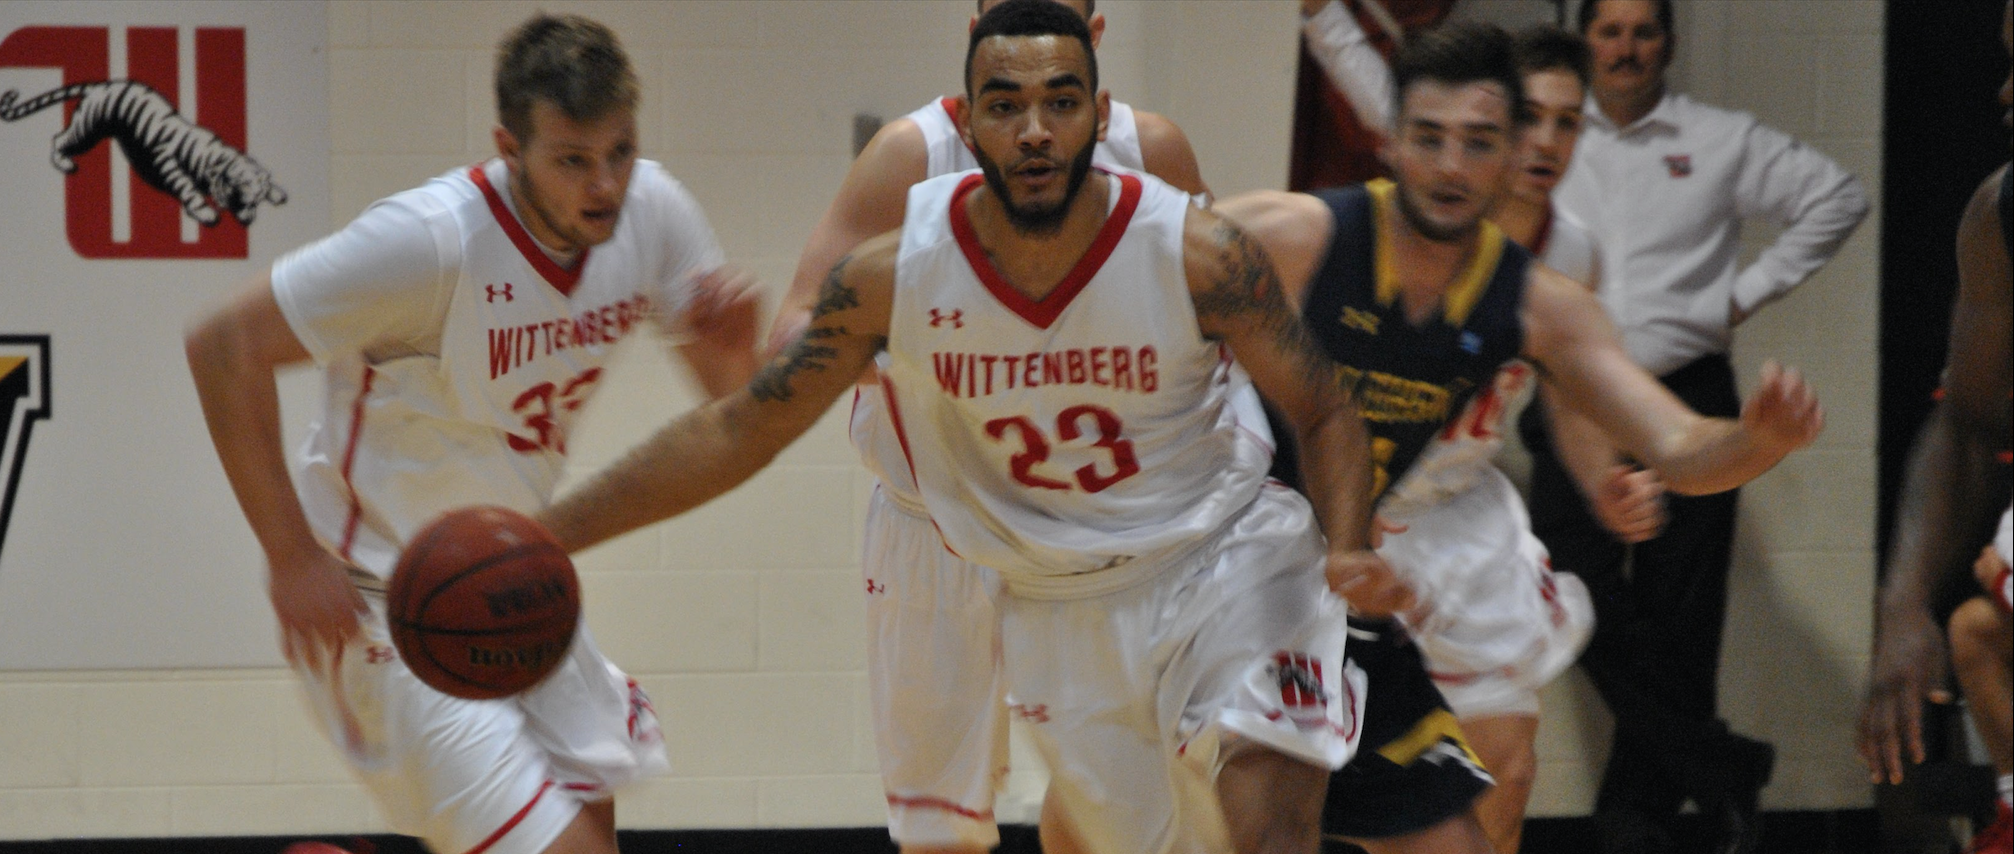 Wittenberg Comes Up Big on the Road Against DePauw